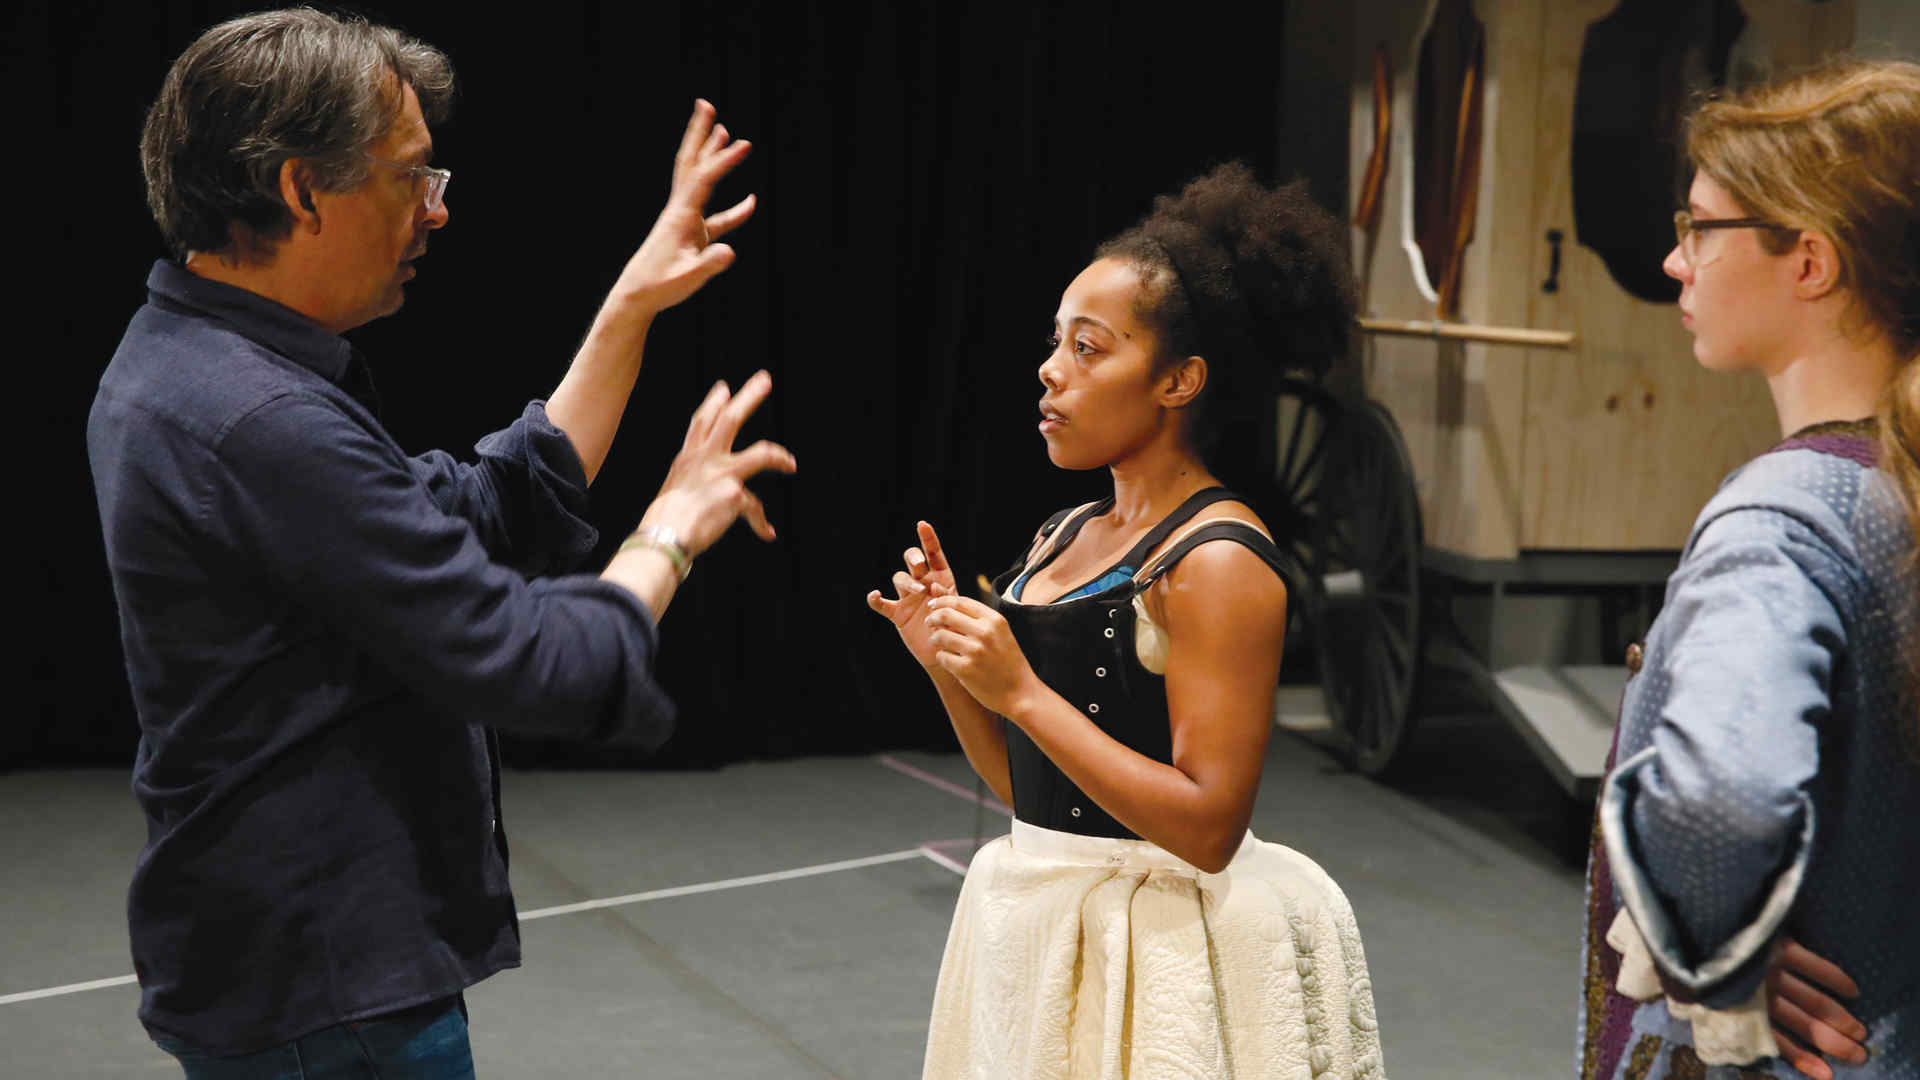 Stephen Wadsworth in rehearsal with Brittany Bradford and Manon Gage